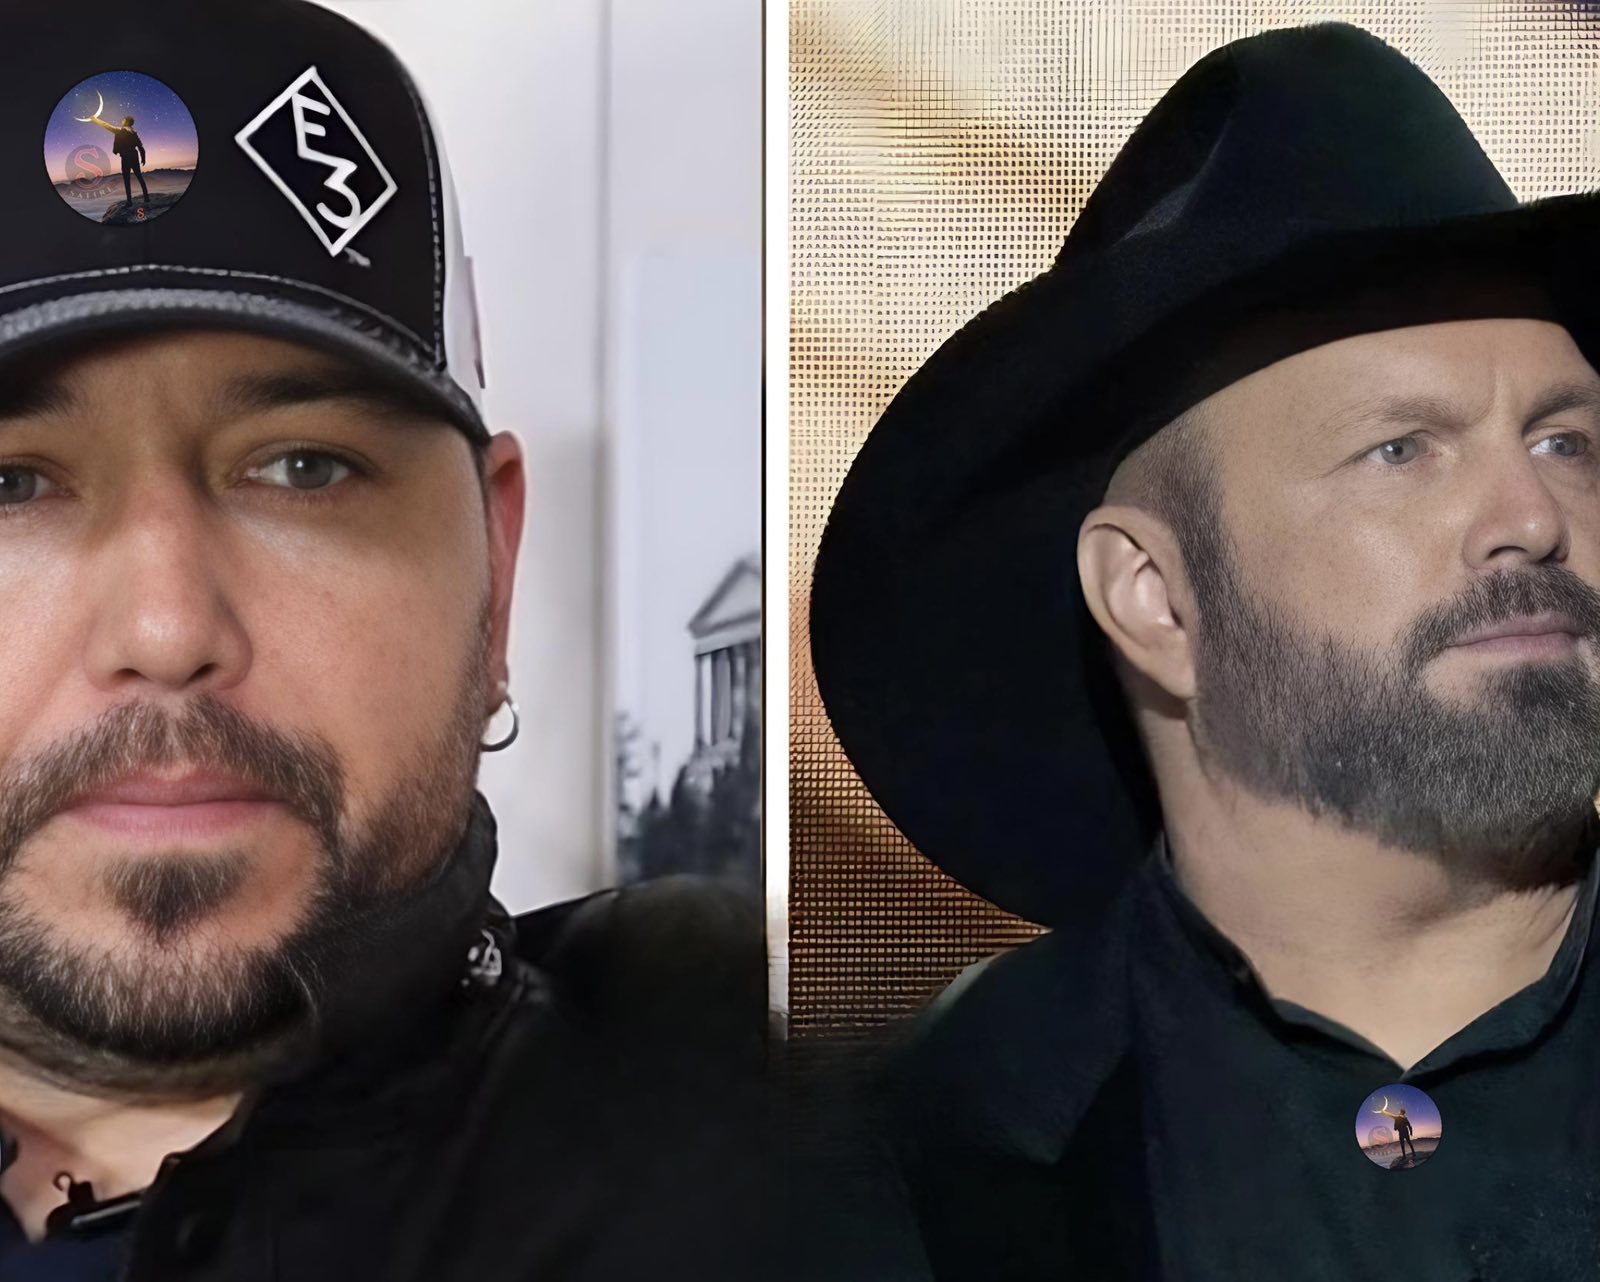 Jason Aldean firmly states that Garth Brooks is “absolutely not welcome” at the Candlelight Vigil for Toby Keith.